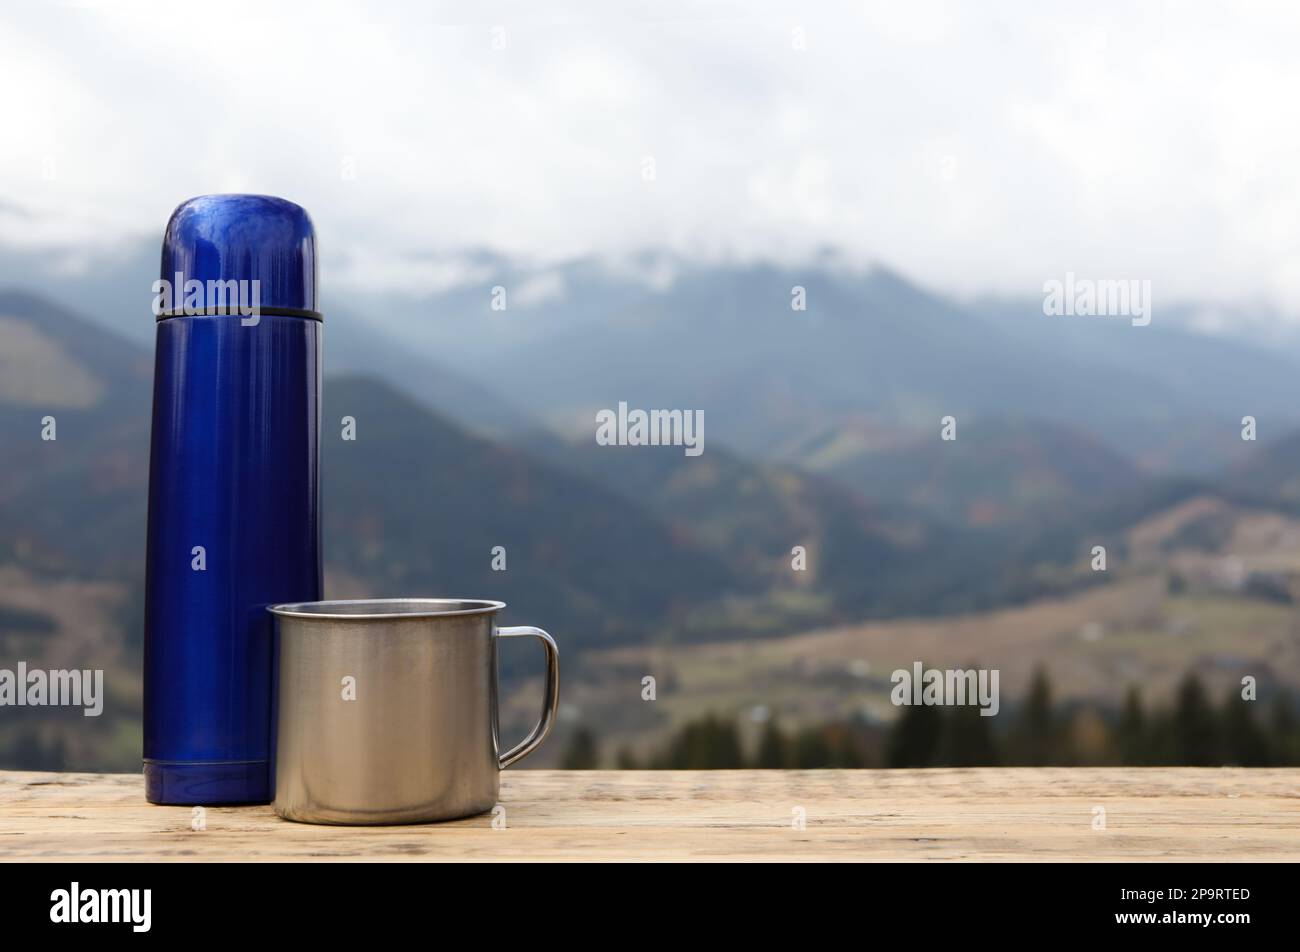 View on the blue thermos on the wooden table on the trekking trail